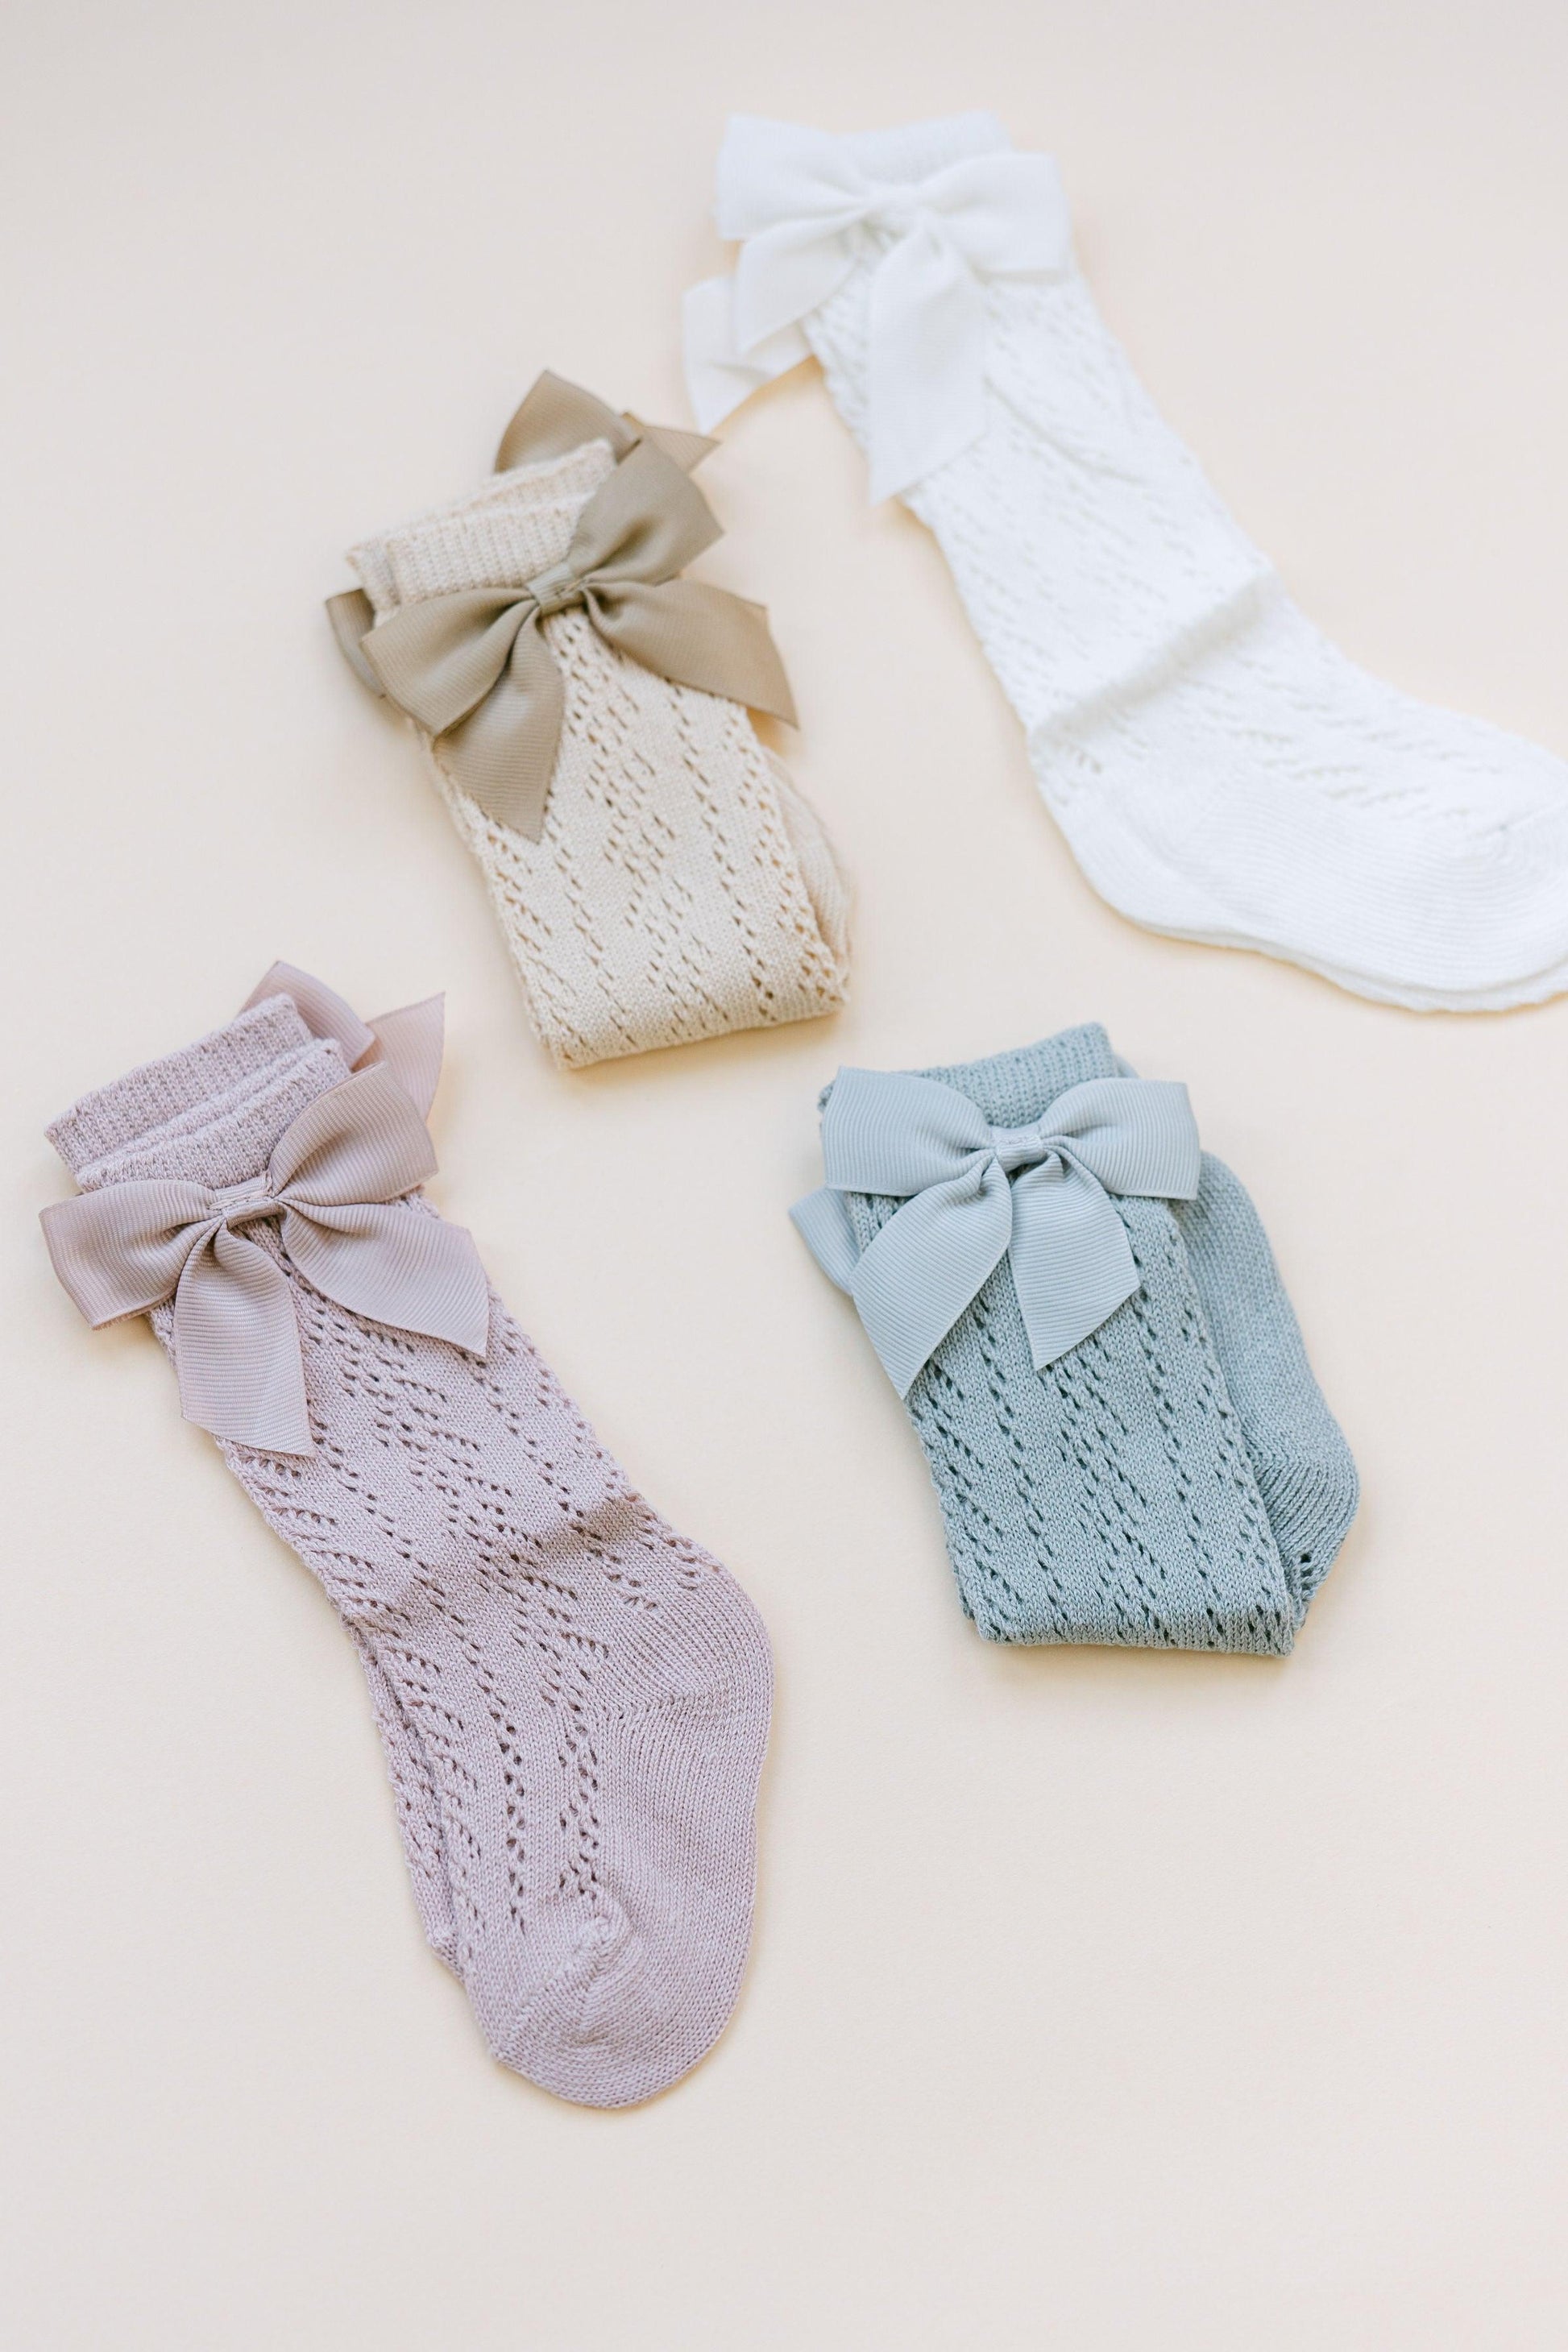 Knee High Socks with Bow - BellaBerryDesigns